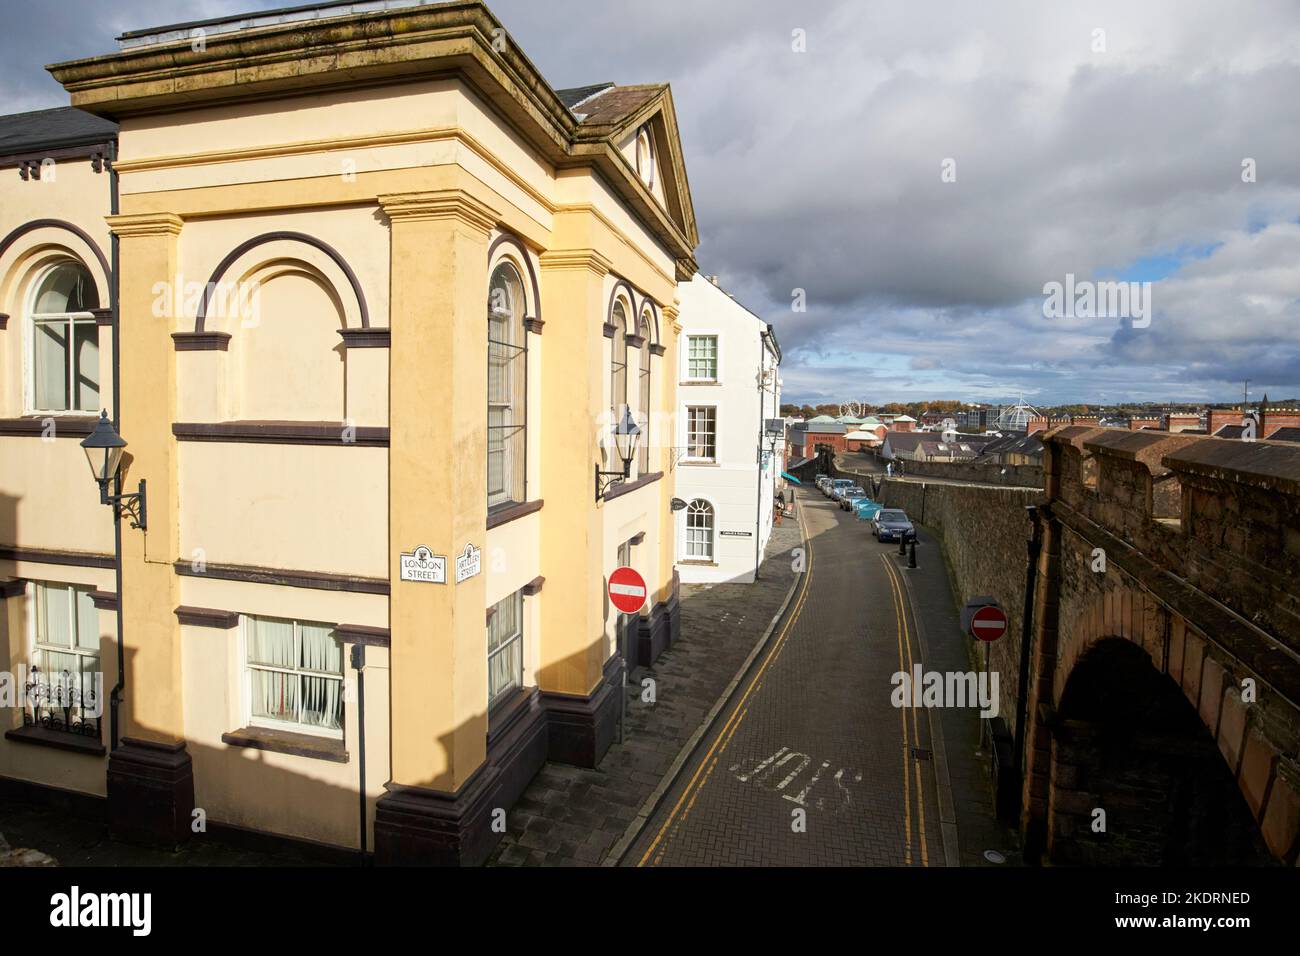 looking down inside the city from derrys walls to london street and artillery street at new gate derry londonderry northern ireland uk Stock Photo